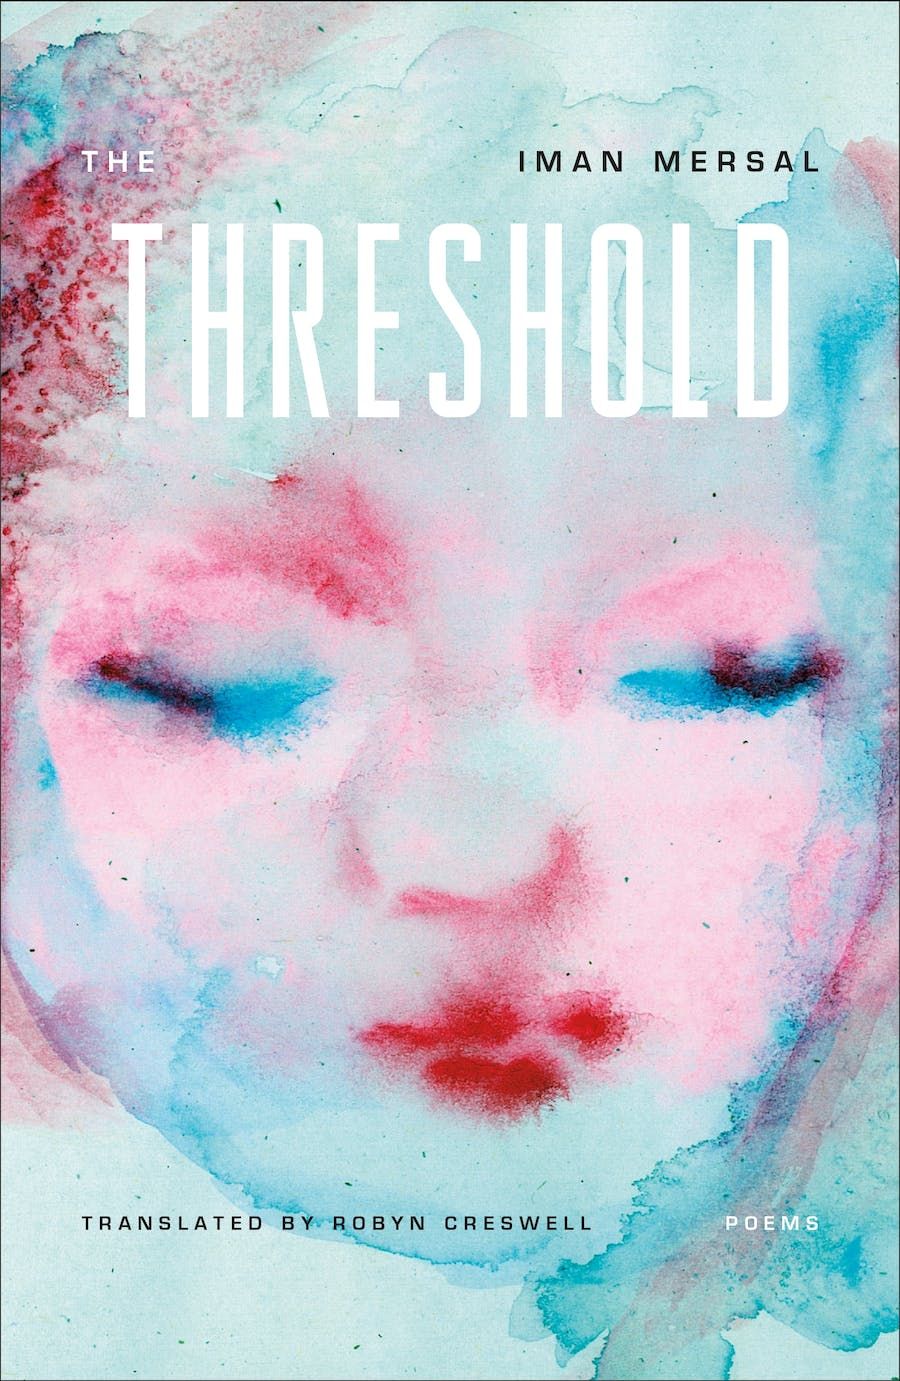 Cover of The Threshold by Iman Mersal